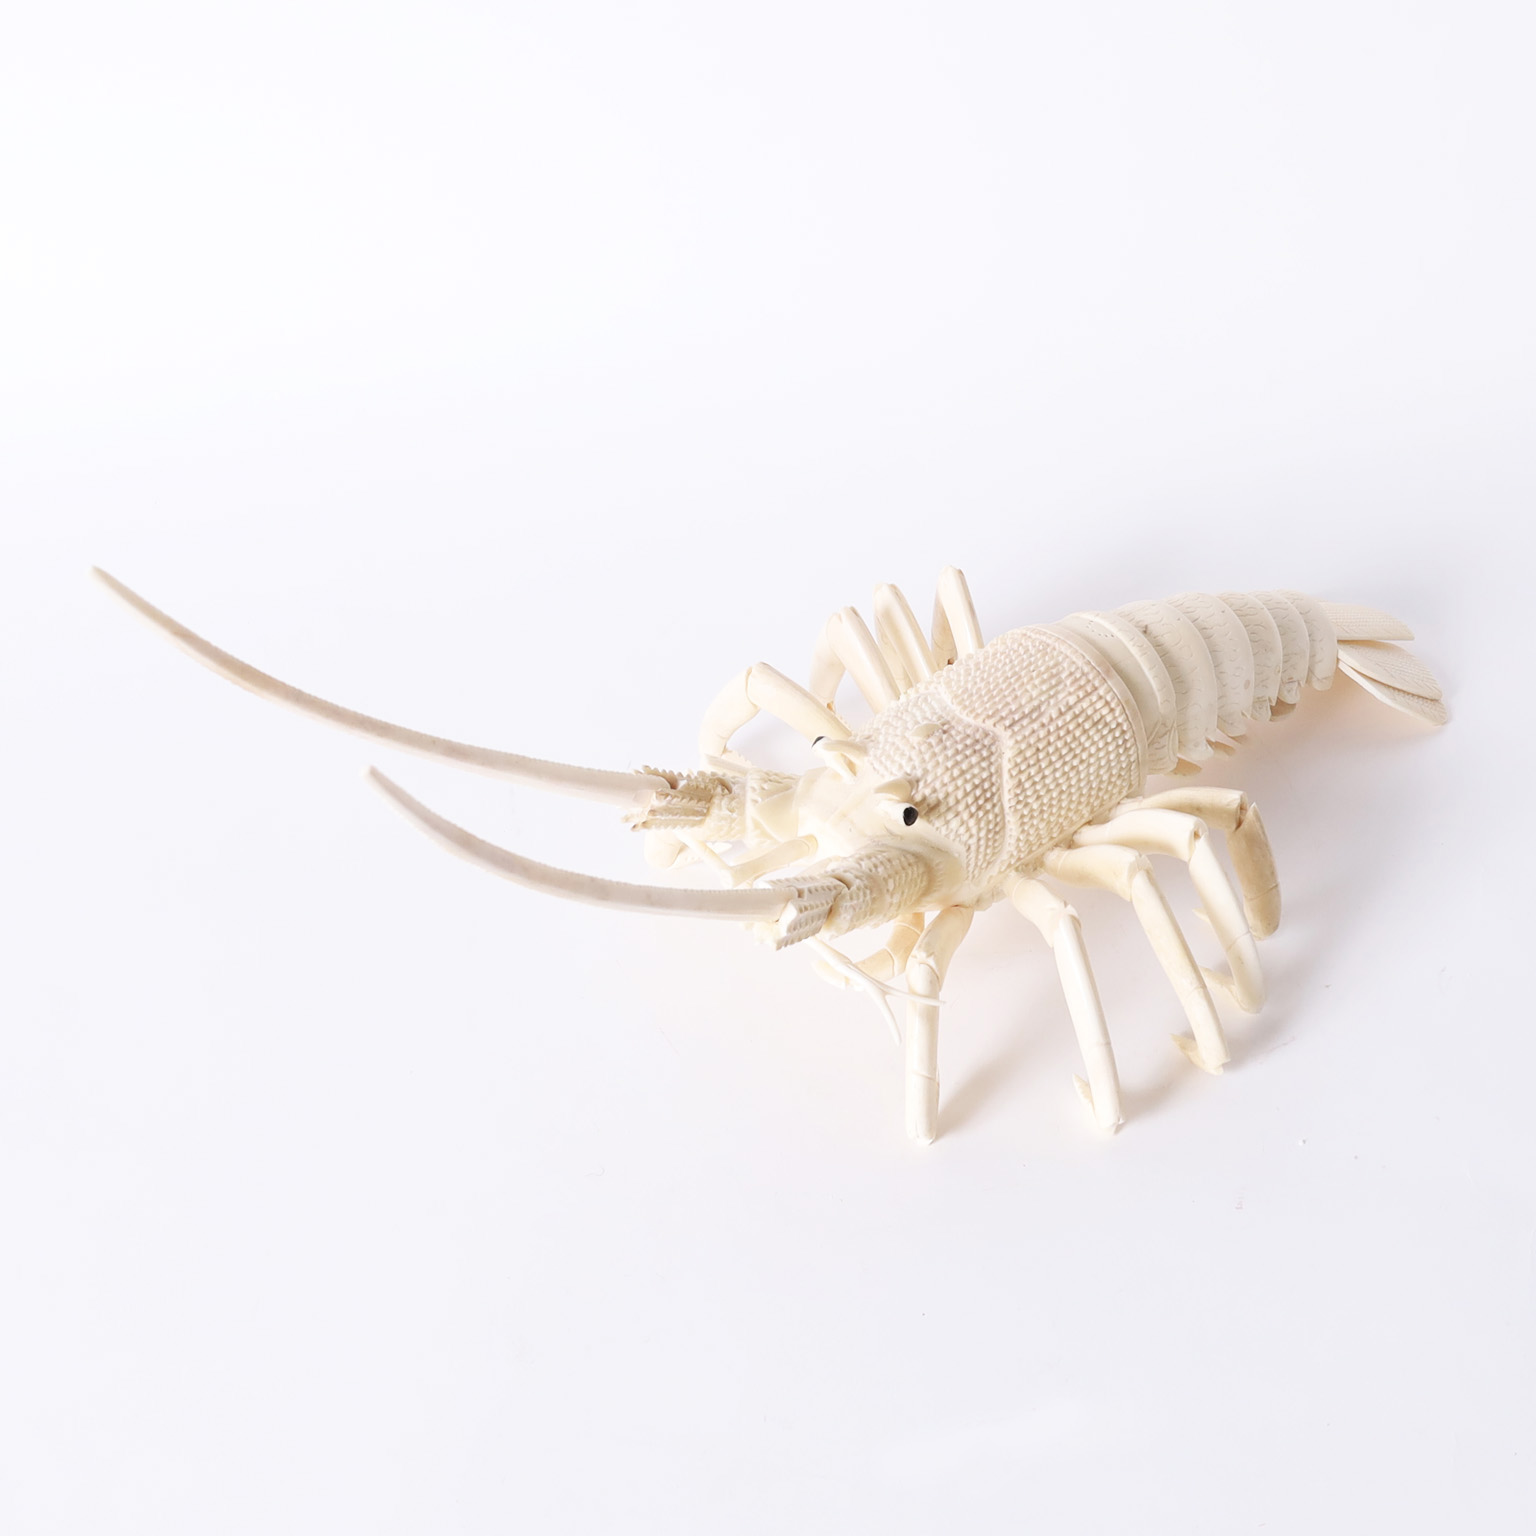 Large Chinese Bone Lobster